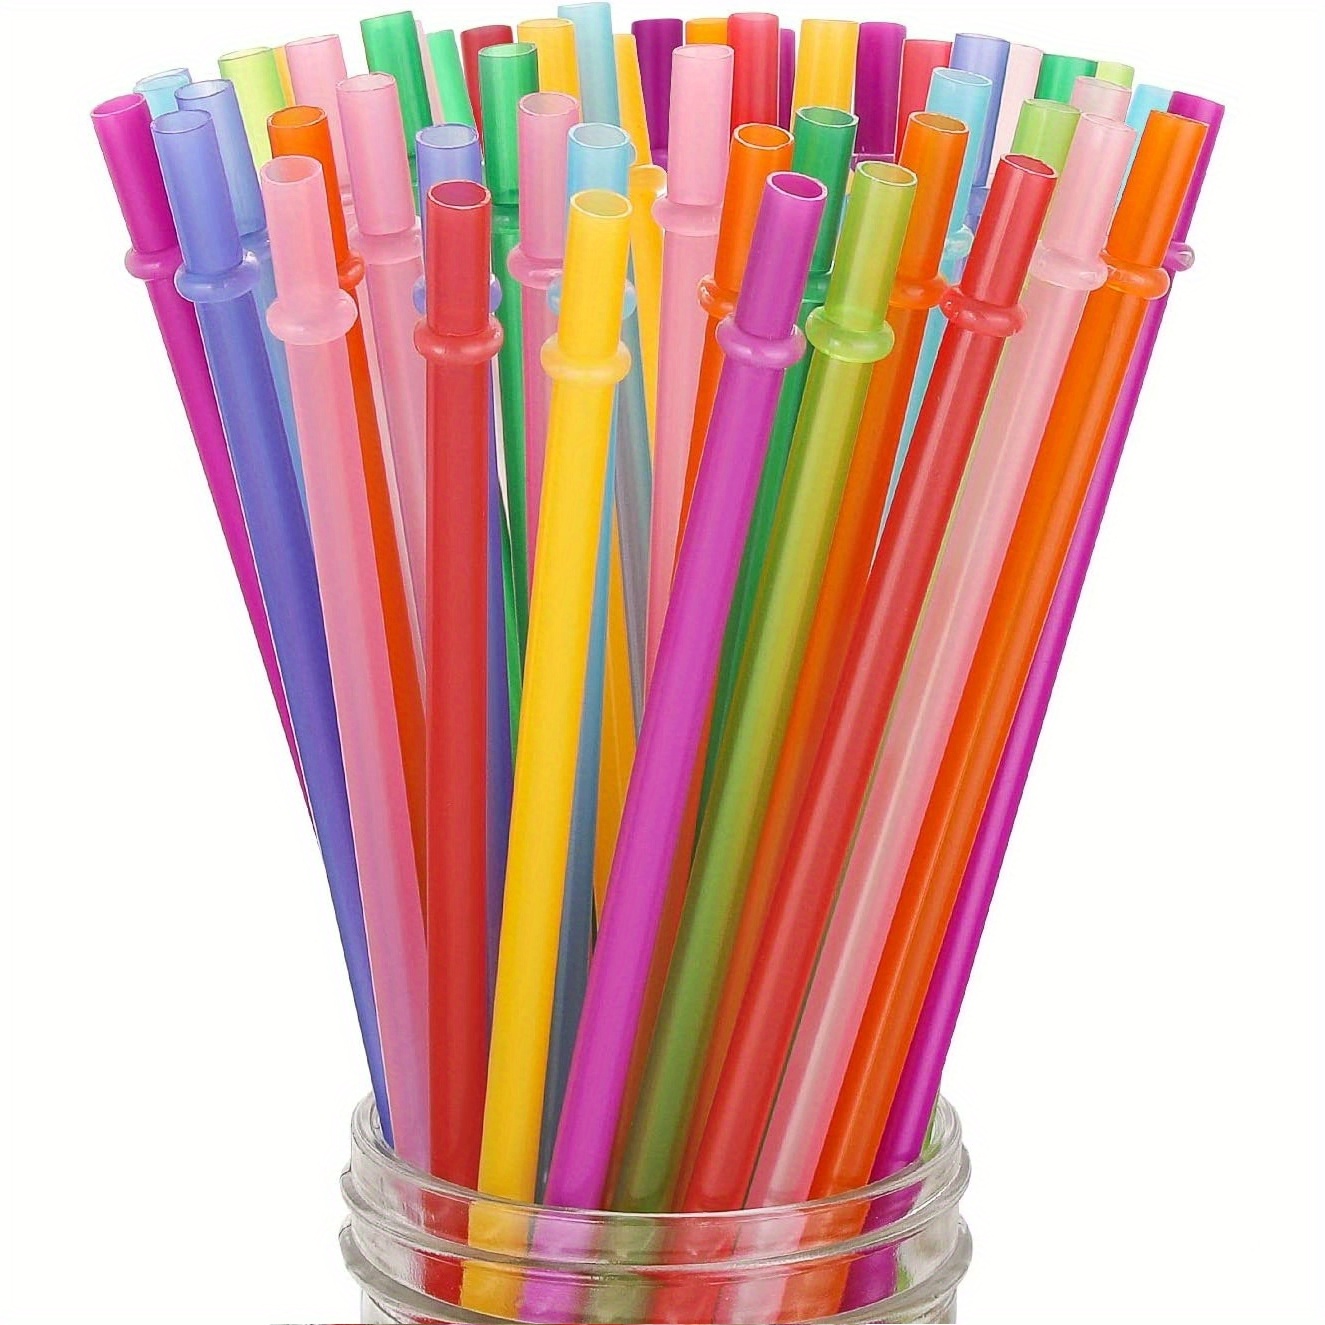 Plastic 10.5” replacement reusable plastic straw for Tumblers